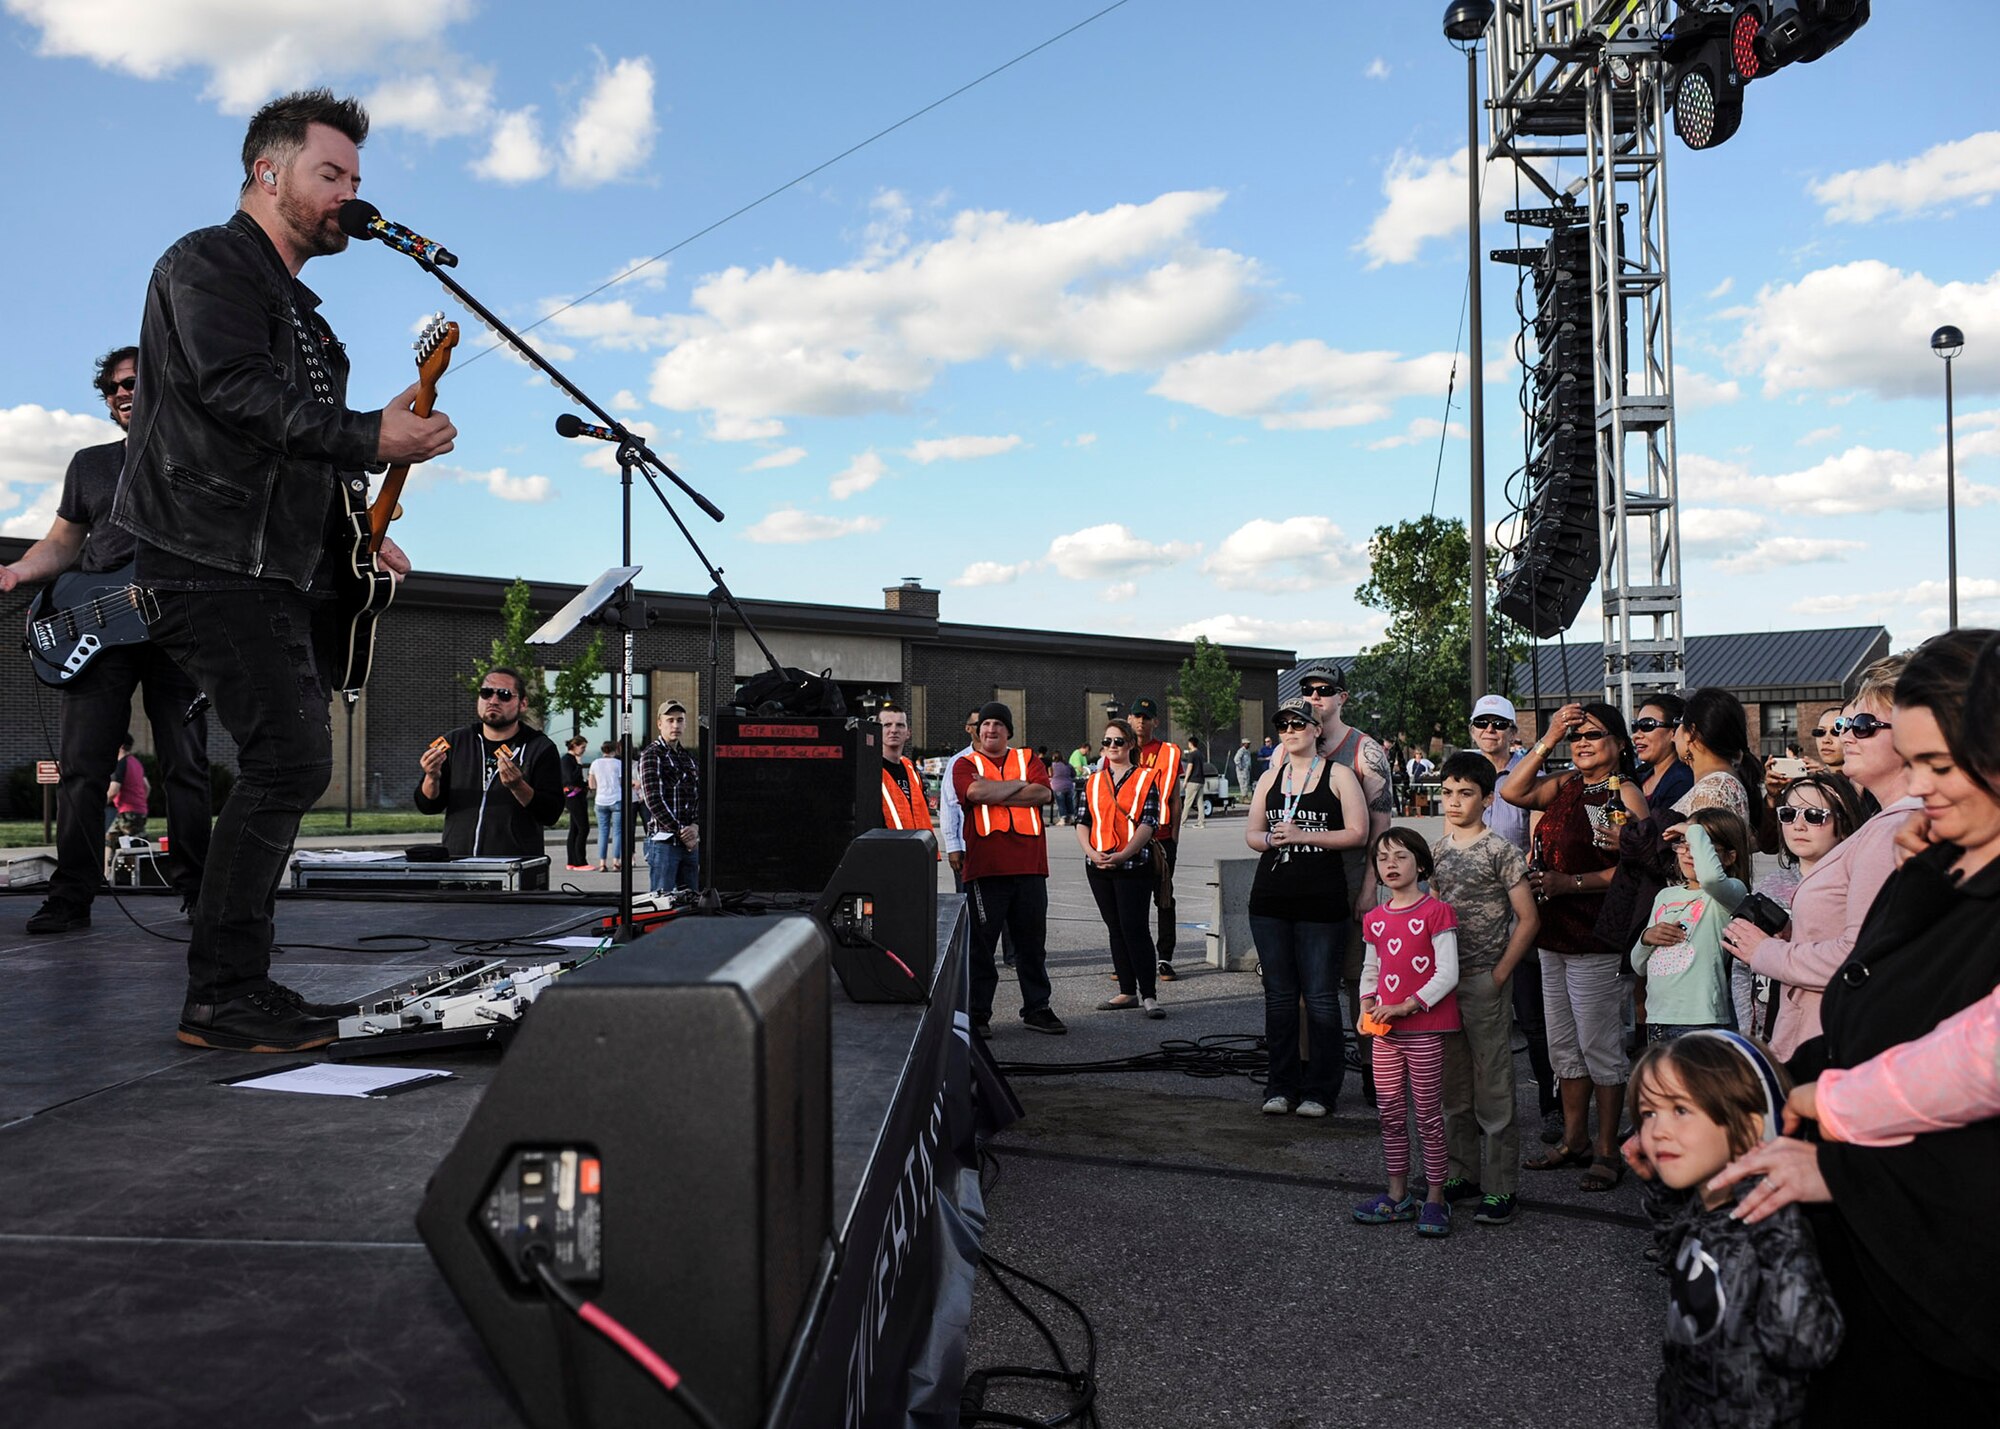 David Cook, left, winner of season seven of “American Idol,” performs a free concert for Airmen and their families outside the Dakota’s Club at Ellsworth Air Force Base, S.D., June 3, 2016. Prior to winning “American Idol,” Cook was working as a bartender and fronting his own band. (U.S. Air Force photo by Airman 1st Class Denise M. Nevins/Released)